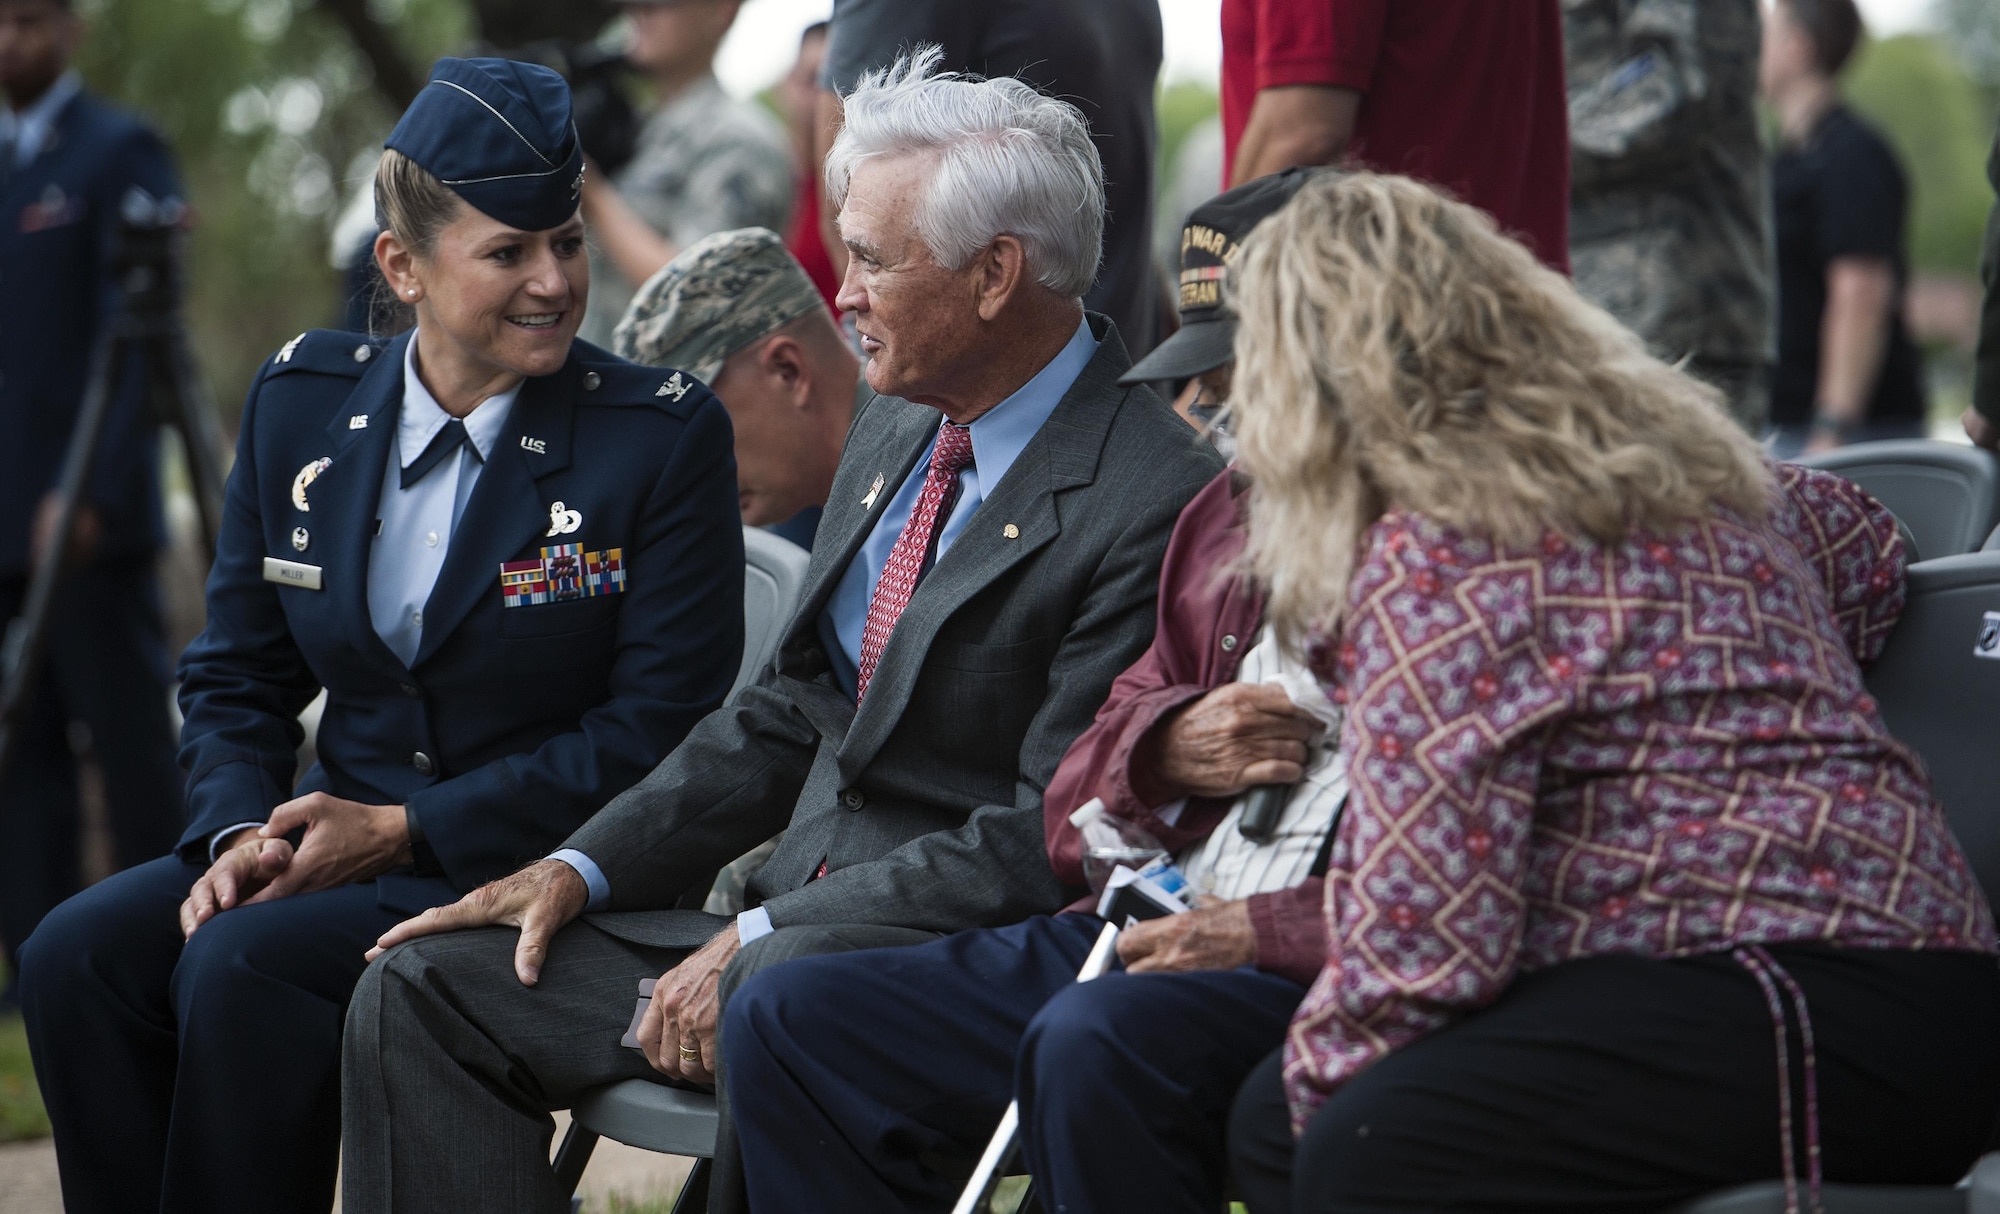 Col. Caroline M. Miller, 633rd Air Base Wing commander, shares a laugh with U.S. Air Force Lt. Col. (Ret.) Barry Bridger, former 43rd Tactical Fighter Squadron F-4 Phantom aircraft commander, during a POW/MIA closing ceremony at Joint Base Langley-Eustis, Va., Sept. 16, 2016. Bridger was shot down, captured and imprisoned for 2,232 days (six years) during the Vietnam War. The third Friday in September has been observed as POW/MIA Recognition Day since 1986. Since World War I, more than 150,000 Americans have been held as prisoners of war and more than 83,400 service members are still unaccounted for. (U.S. Air Force photo by Staff Sgt. Nick Wilson)